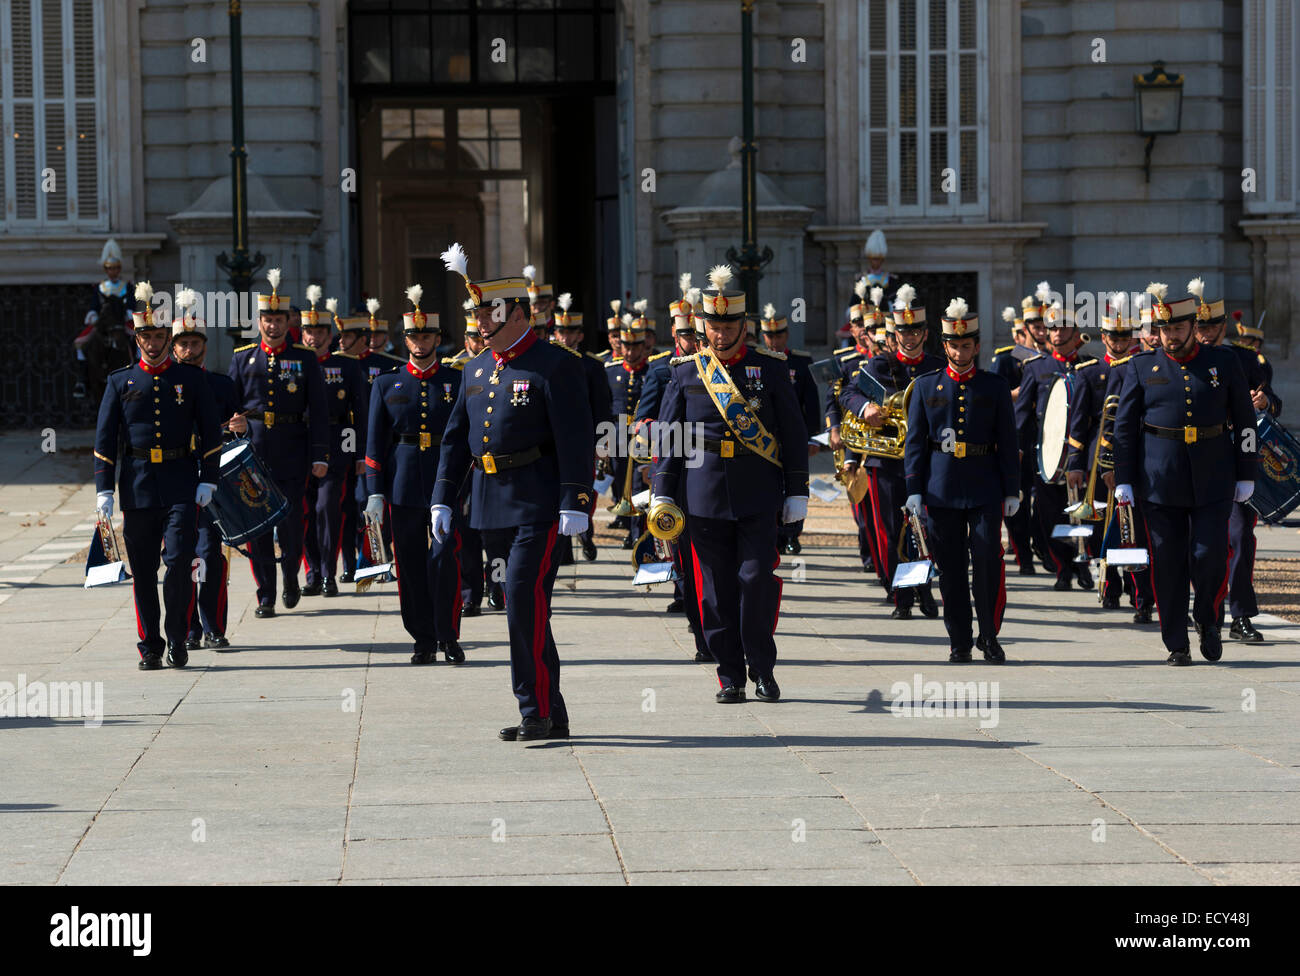 Royal band in front of the Royal Palace, Madrid, Spain Stock Photo